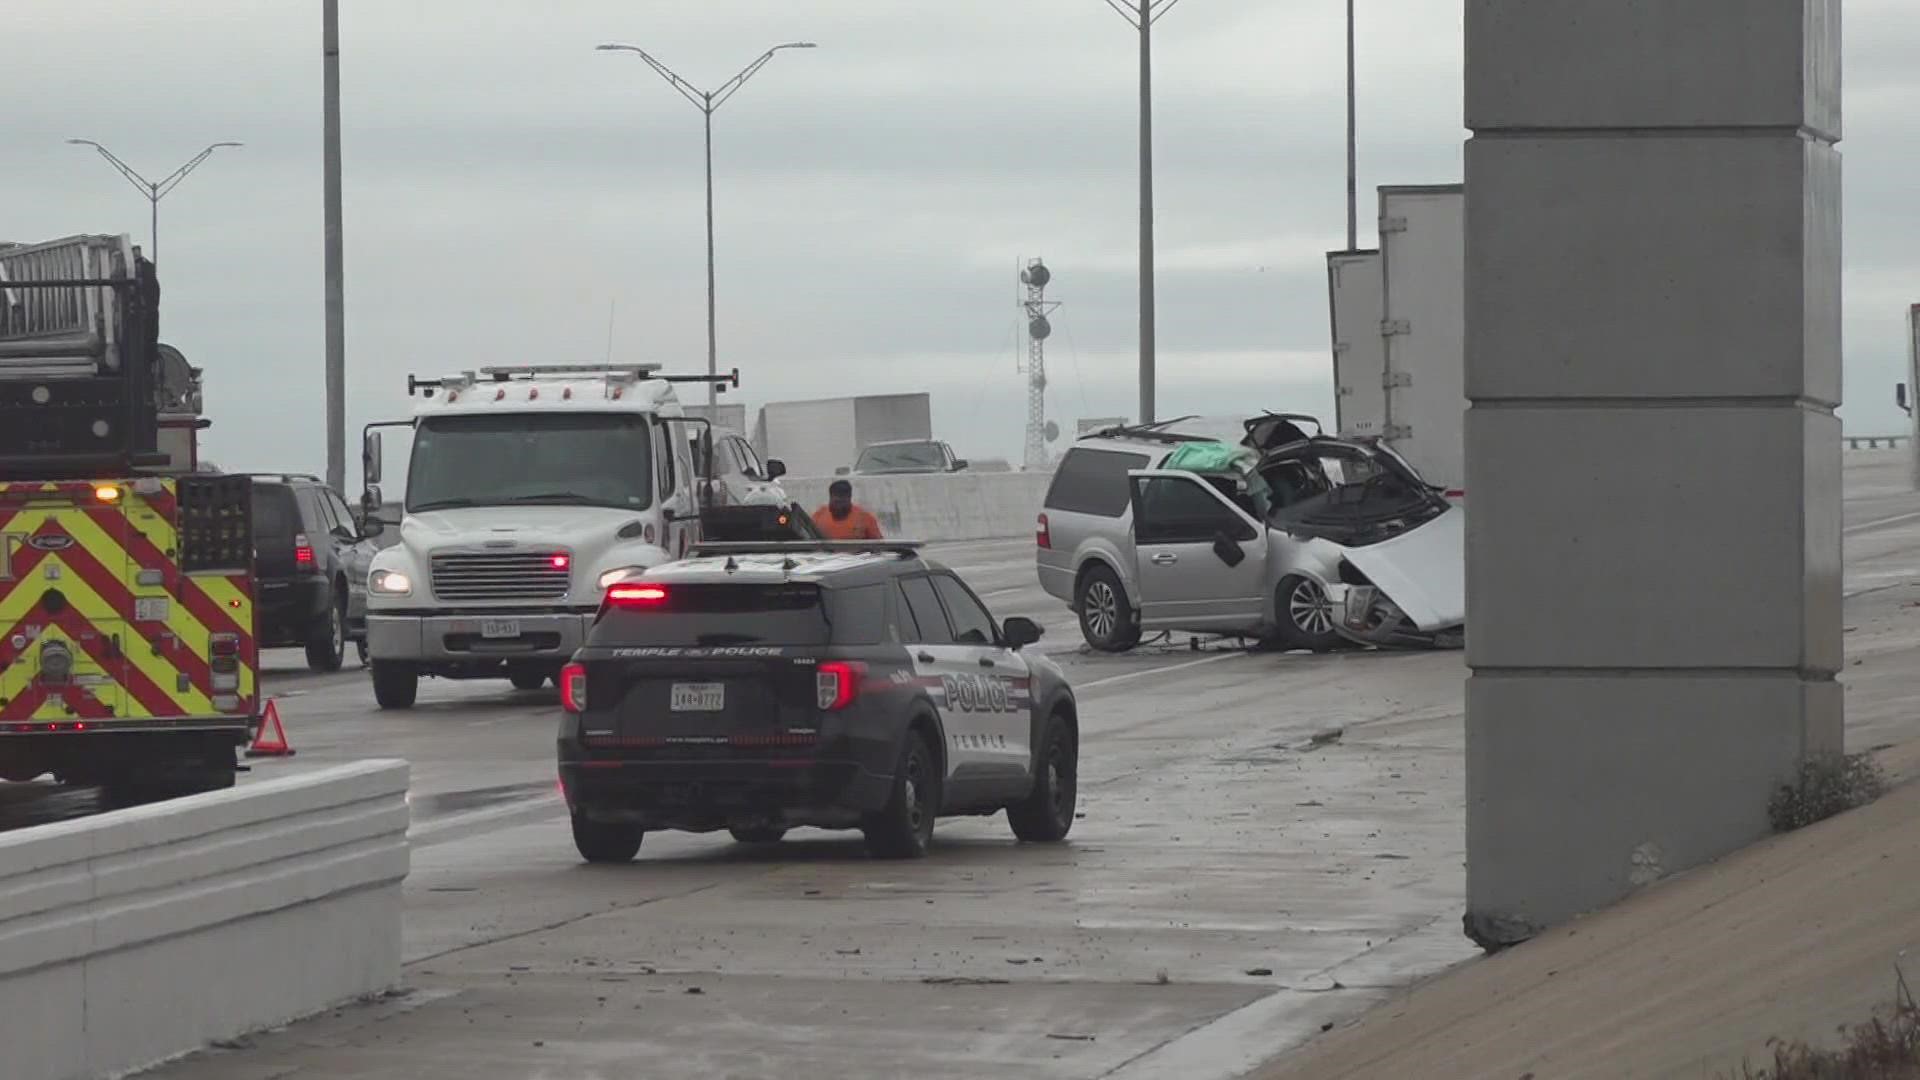 According to the Temple Police Department, the crash happened on southbound I-35 near Industrial Boulevard and Nugent Avenue.